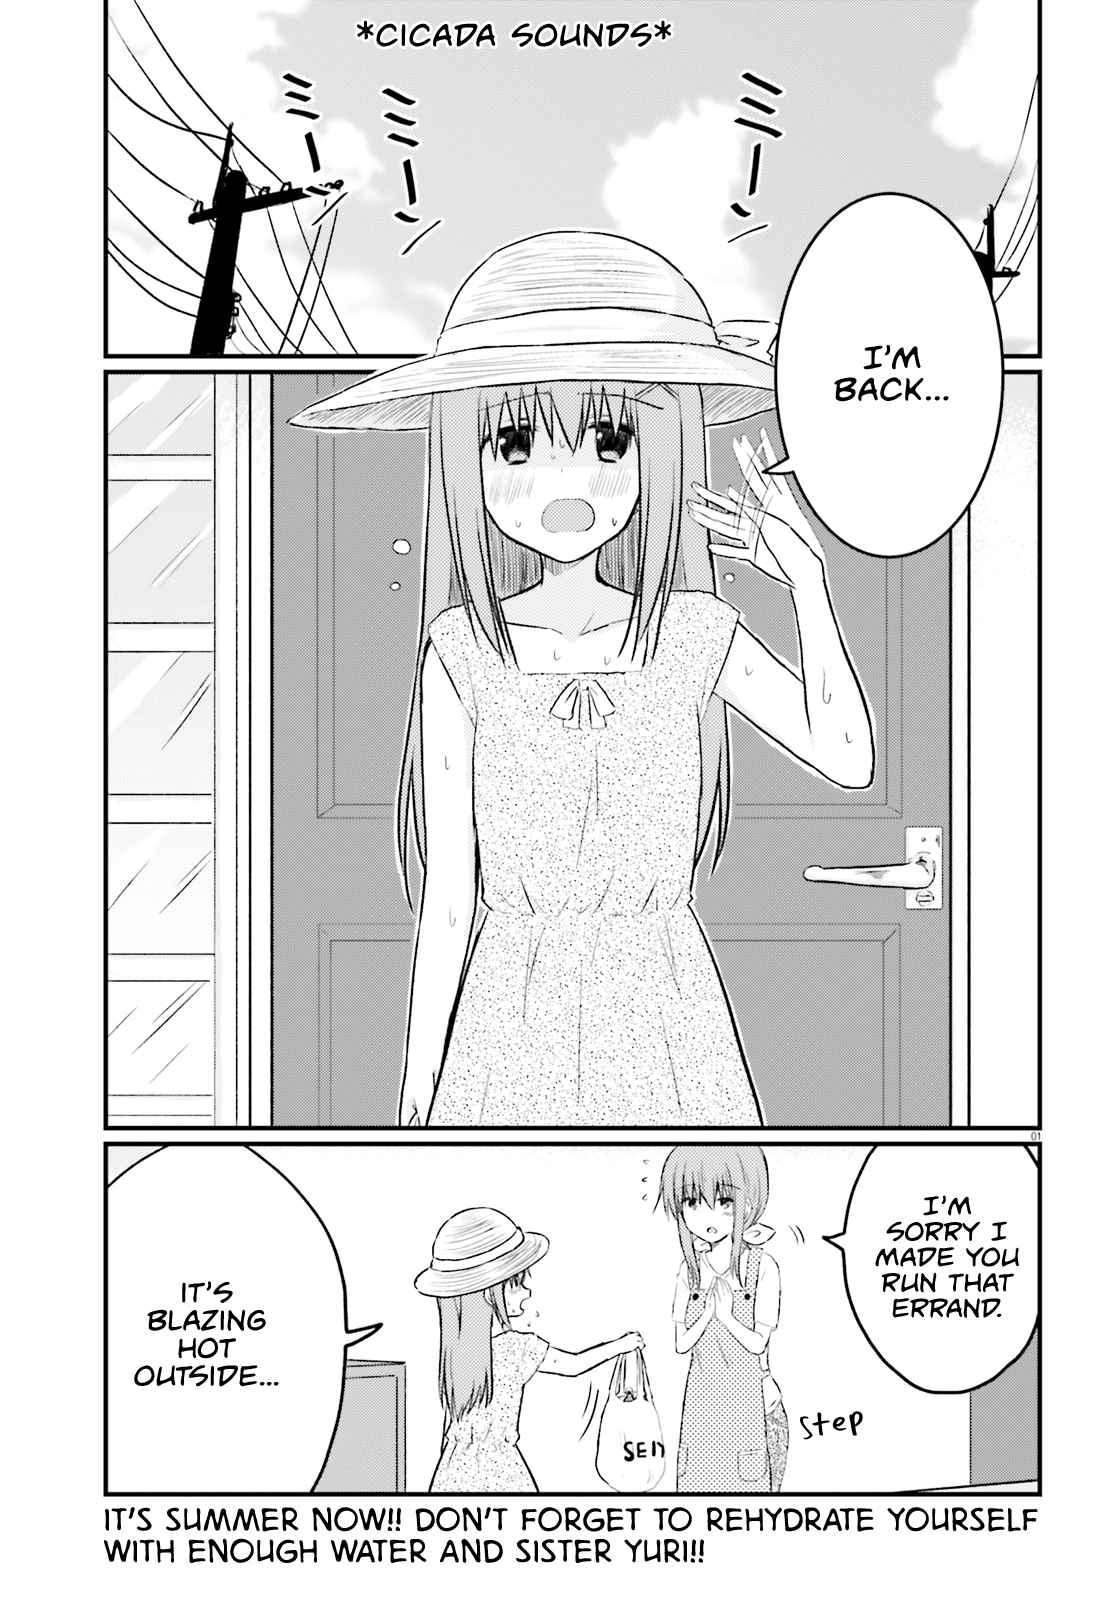 Her Elder Sister Has a Crush on Her, But She Doesn't Mind. Ch. 13 Siscon Elder Sister, Summer Heat, and Regrets